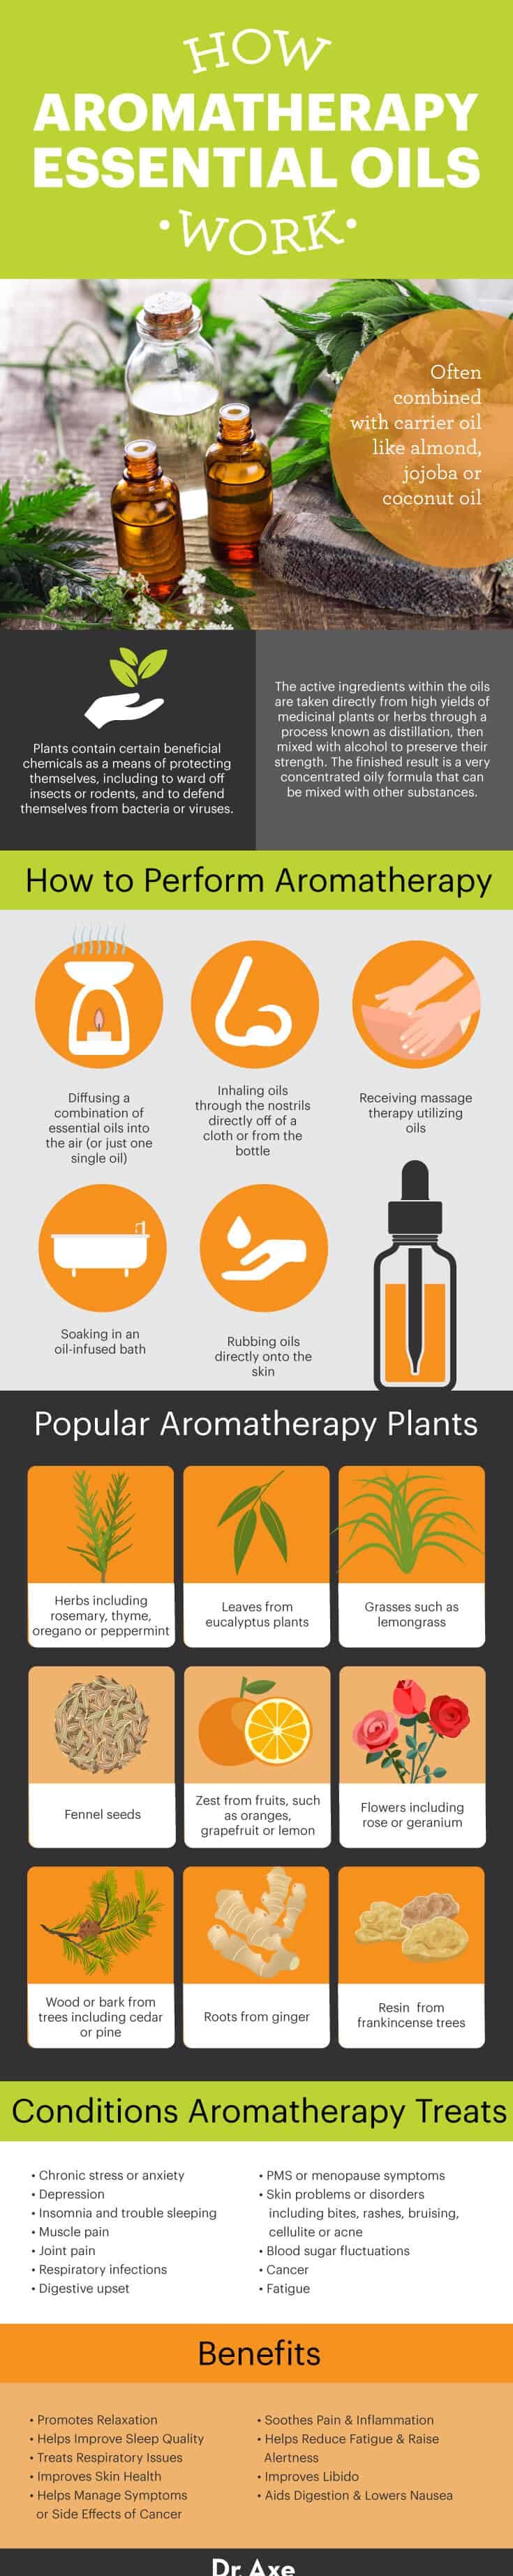 How aromatherapy essential oils work - Dr. Axe